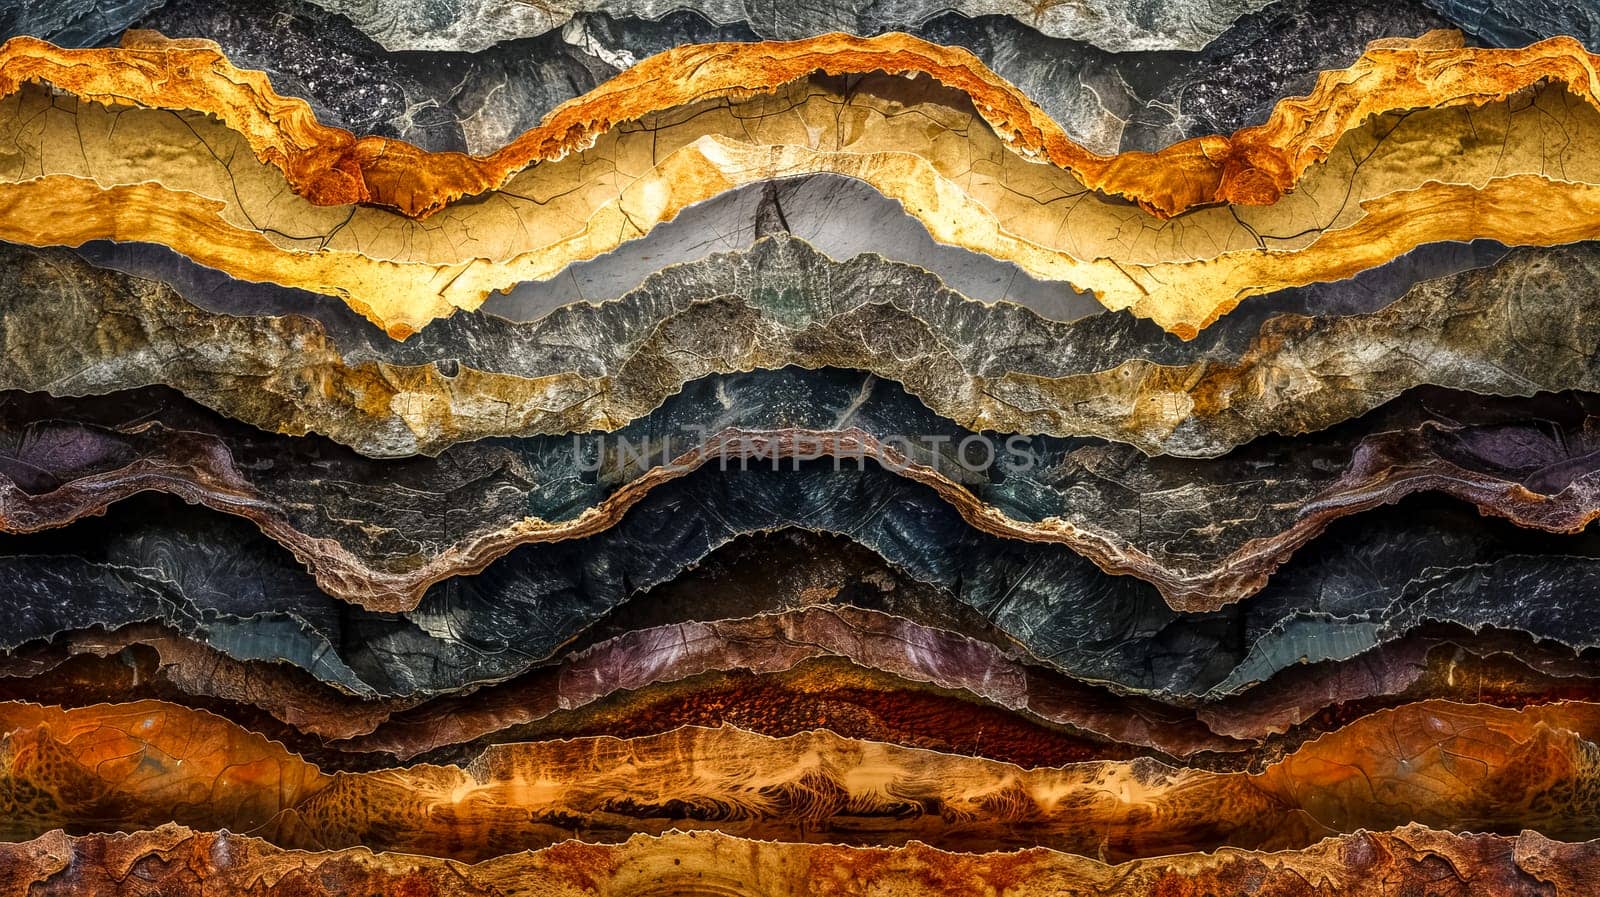 Vibrant and colorful abstract digital artwork inspired by the rich and symmetrical textures of geologic strata and sedimentary layers